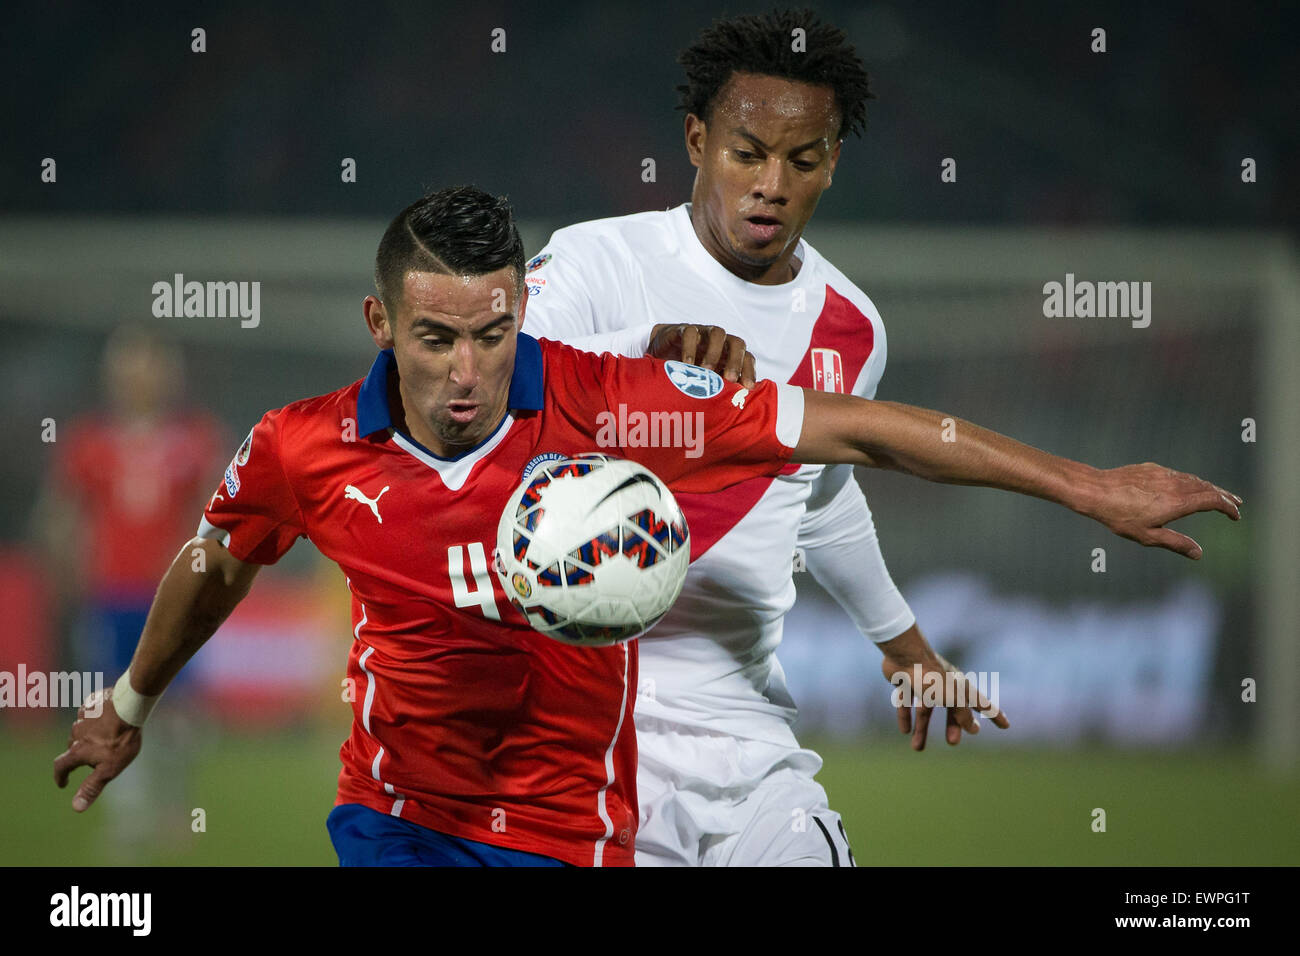 Santiago, Chile. 29th June, 2015. Mauricio Isla (L) from Chile vies for the ball with Andre Carrillo (R) from Peru during the Copa America Chile 2015 semifinal match, held at National Stadium, in Santiago, Chile, on June 29, 2015. Chile won 2-1 Credit:  Pedro Mera/Xinhua/Alamy Live News Stock Photo